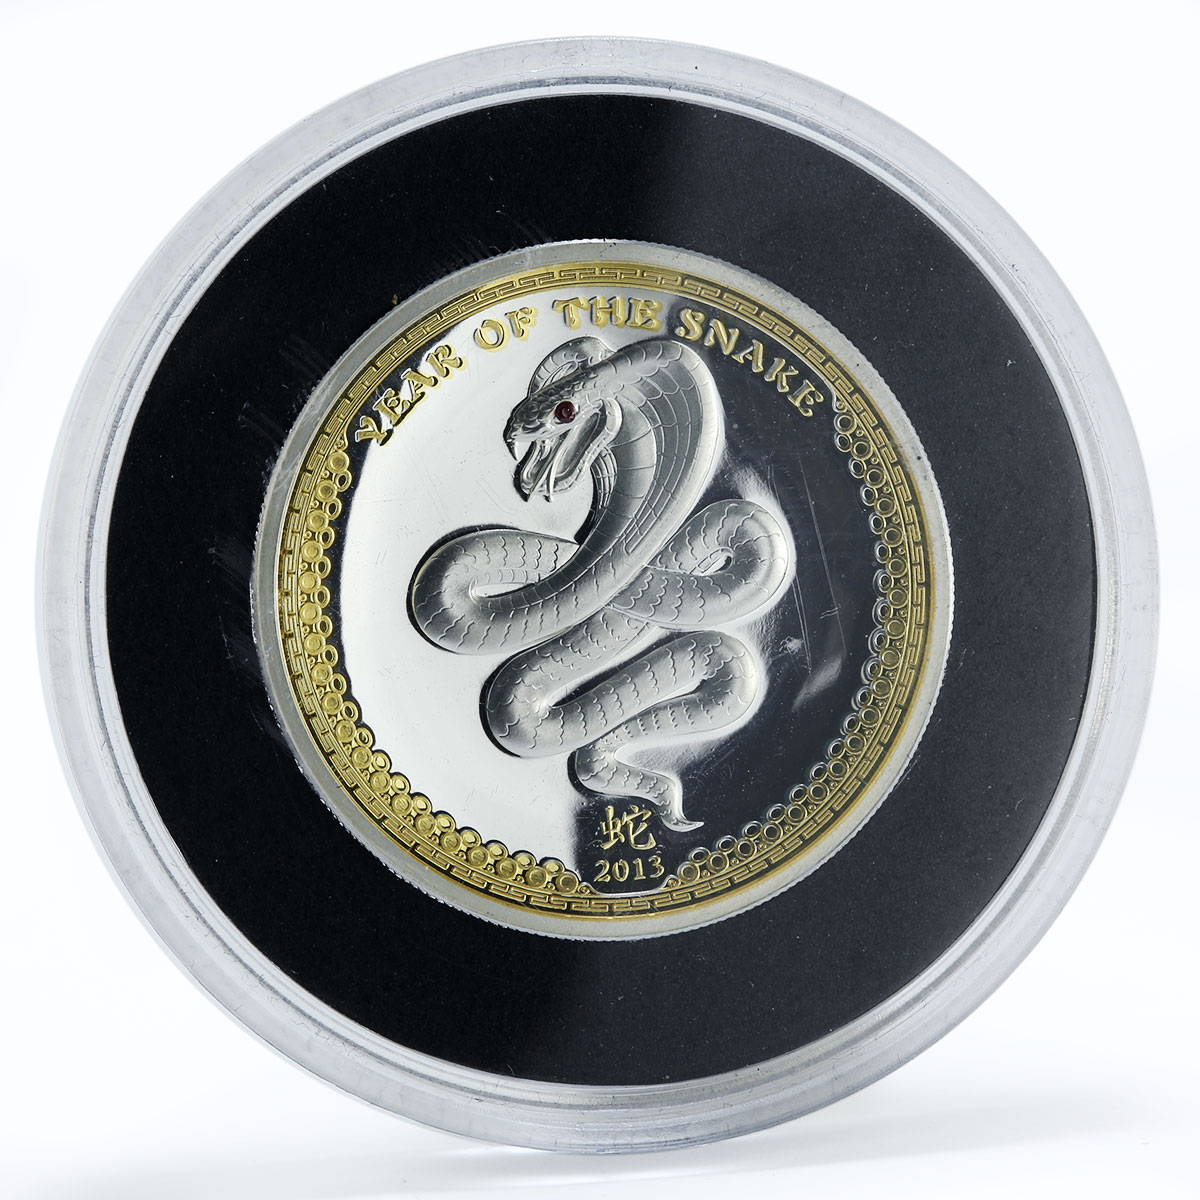 Palau 5 dollars Year of the Snake gilded proof silver coin 2013